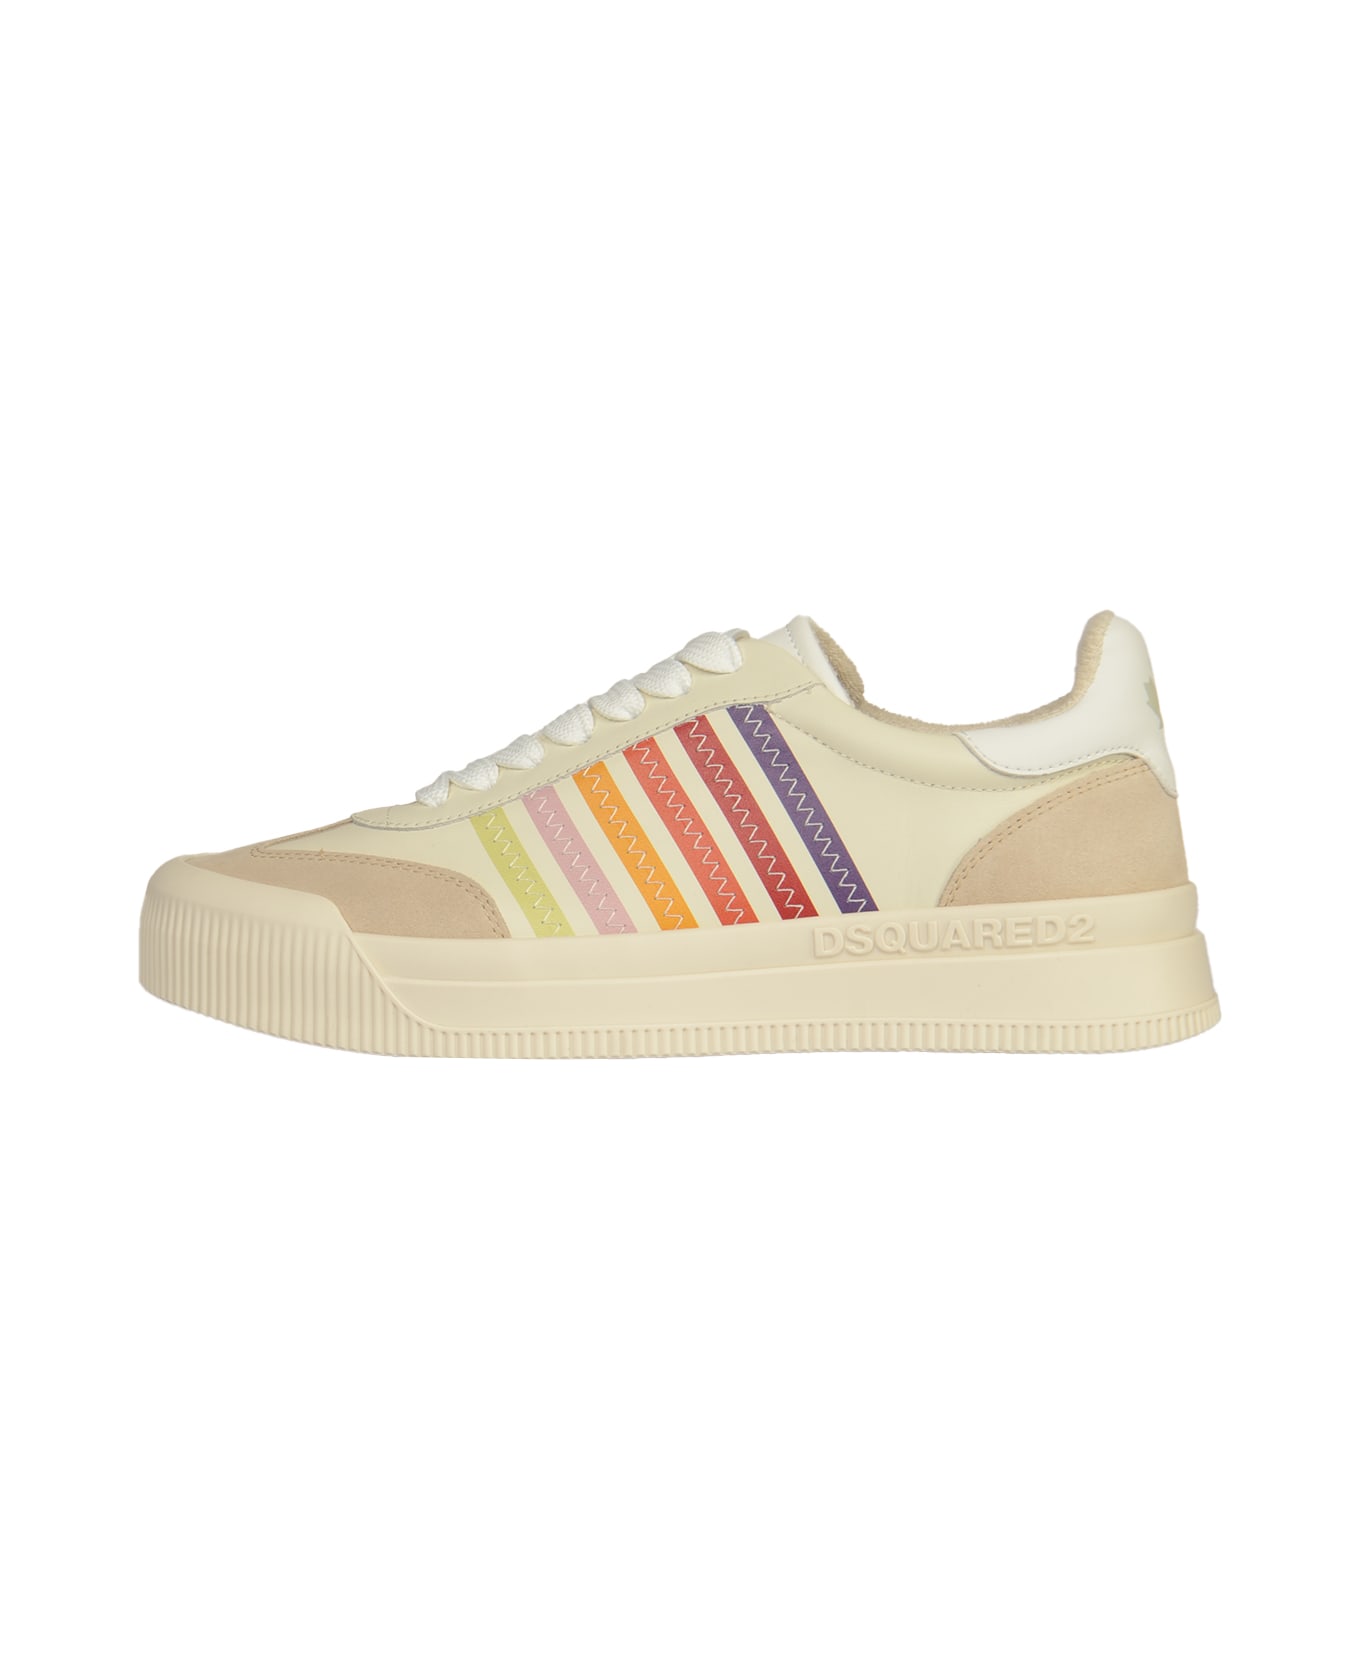 Dsquared2 New Jersey Sneakers - Beige/Multicolor